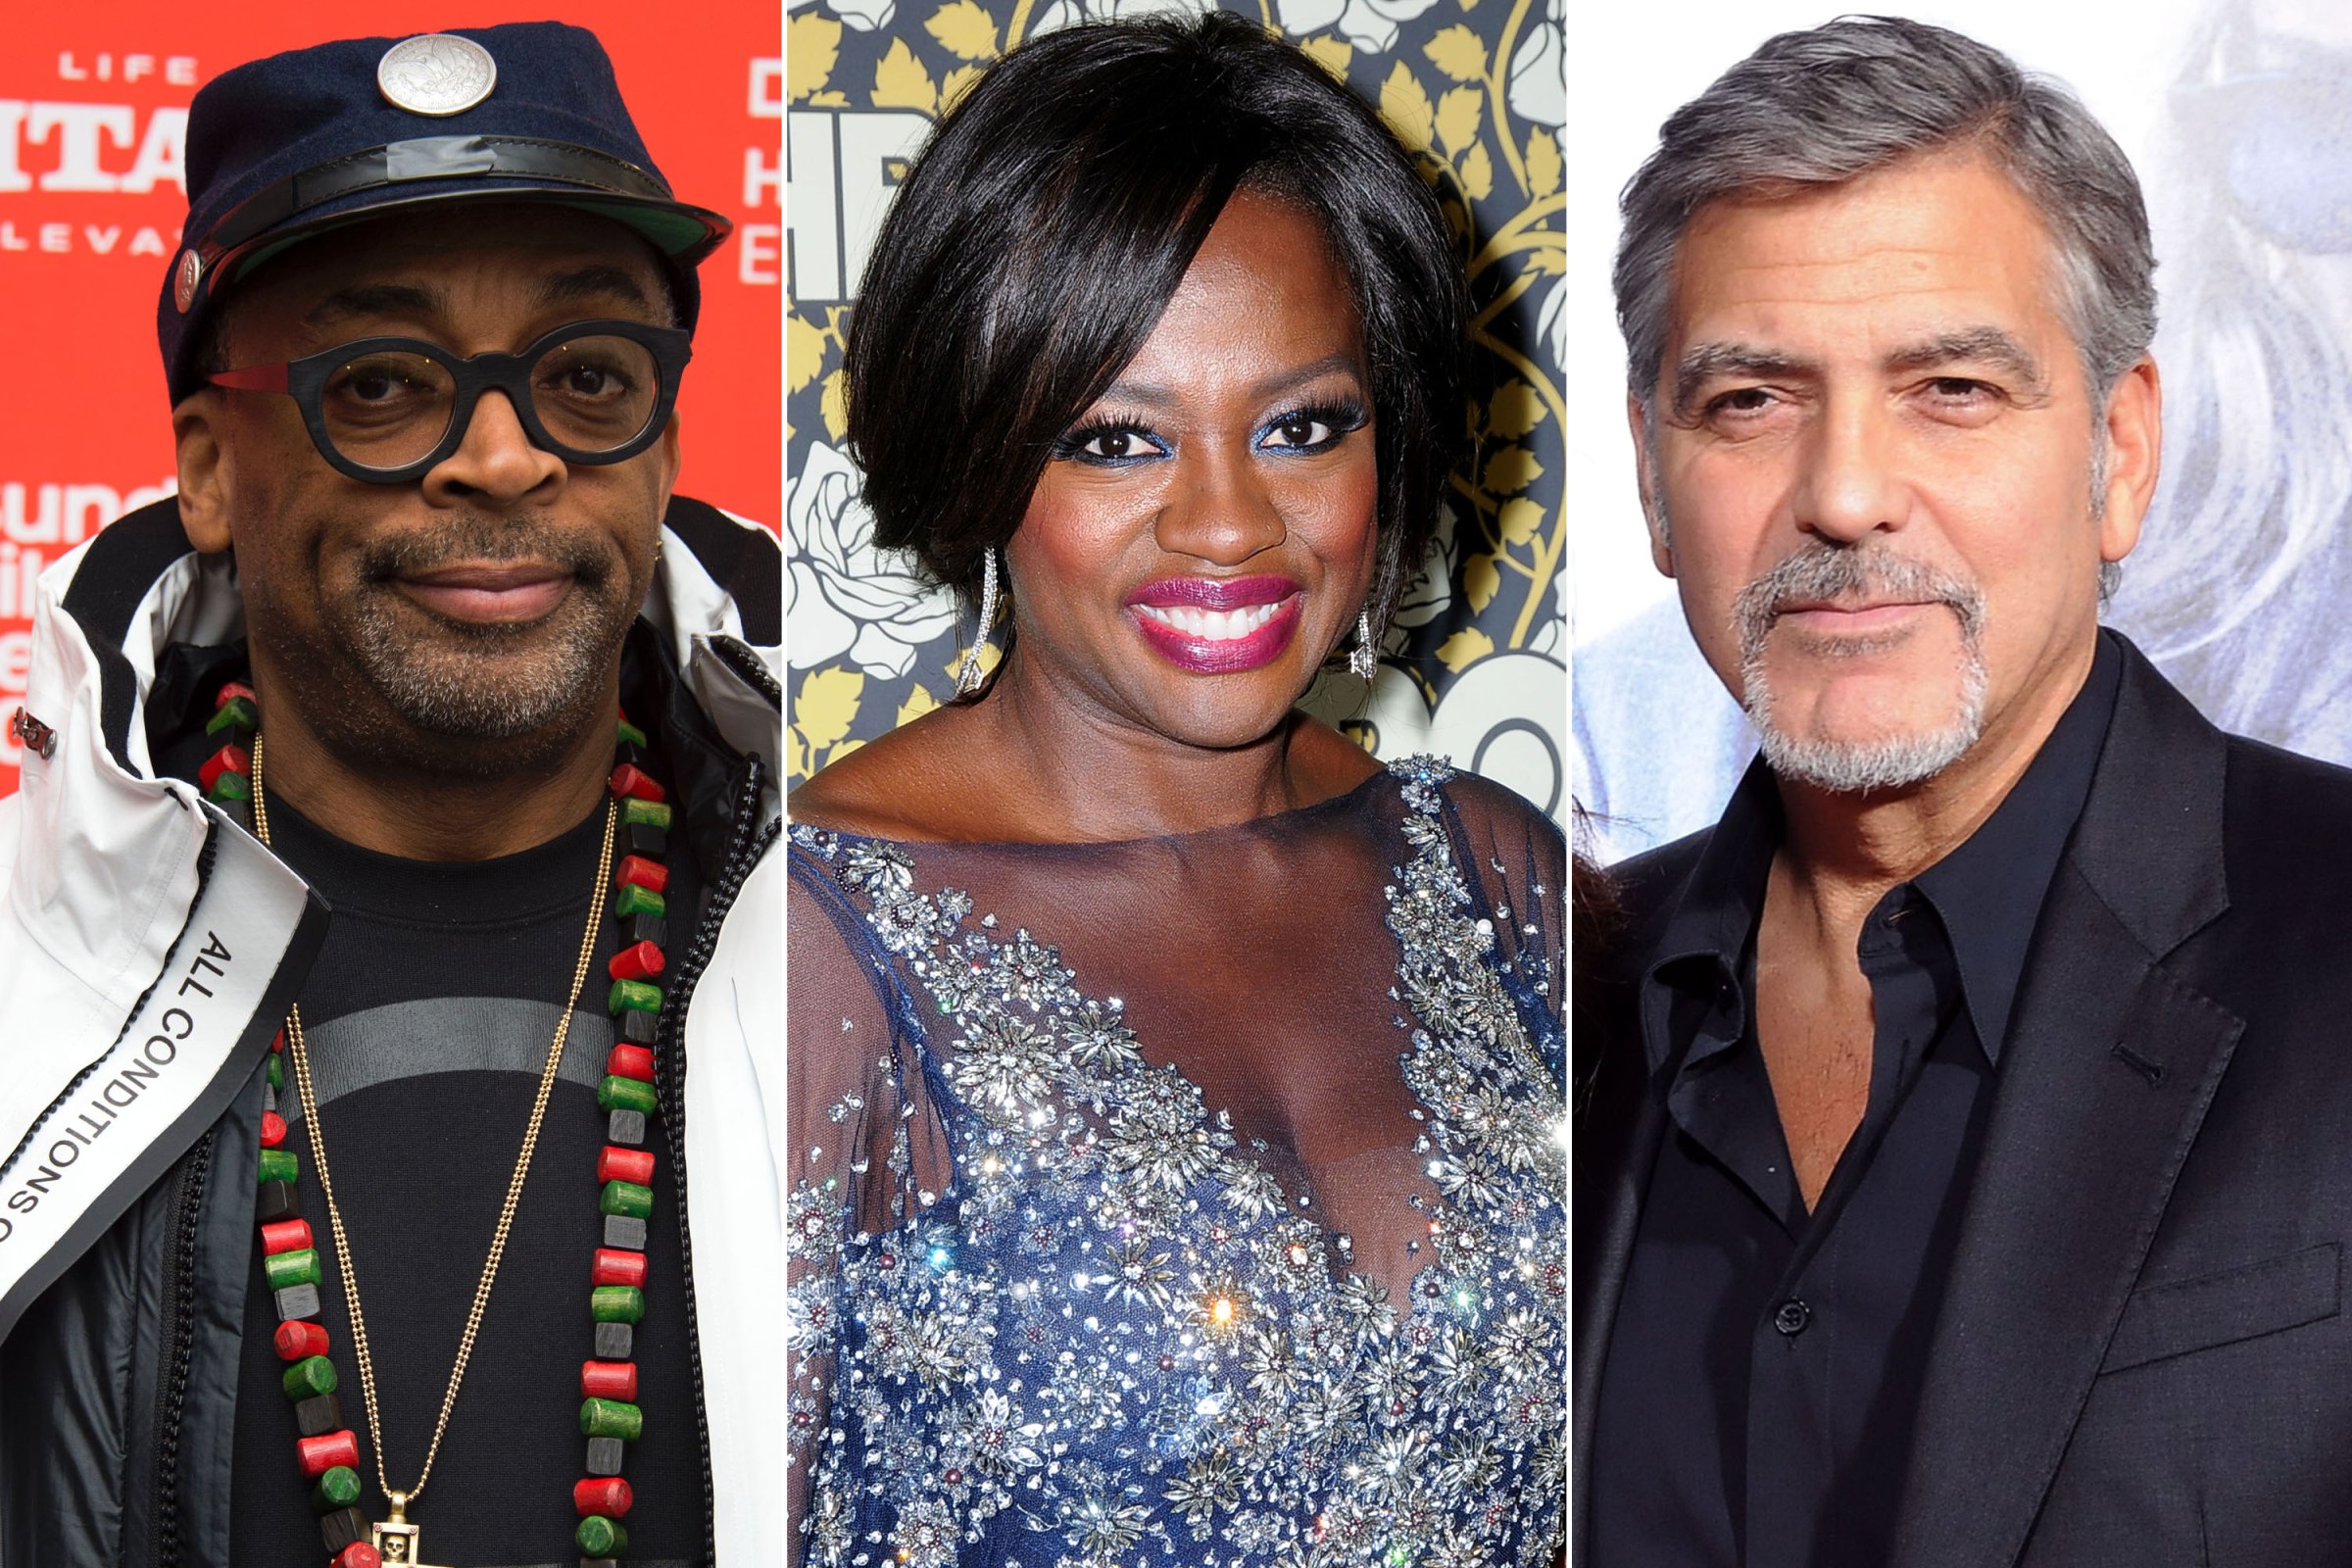 From left to right; director Spike Lee, actress Viola Davis and actor and producer George Clooney.